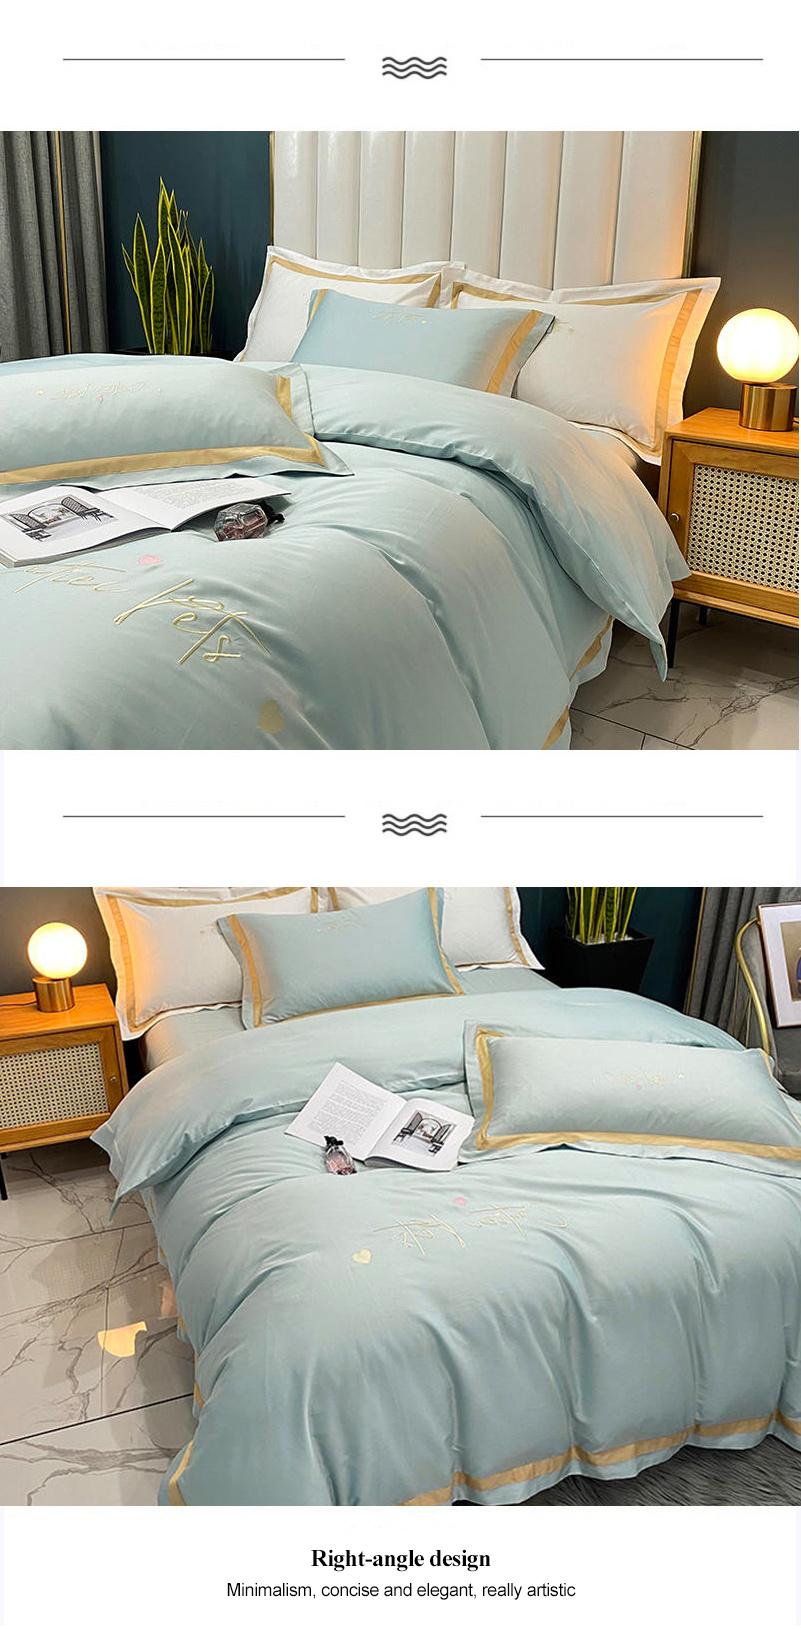 Luxury Home Textile Bedding Set 100% Cotton Fabric Highest Quality for King Bed